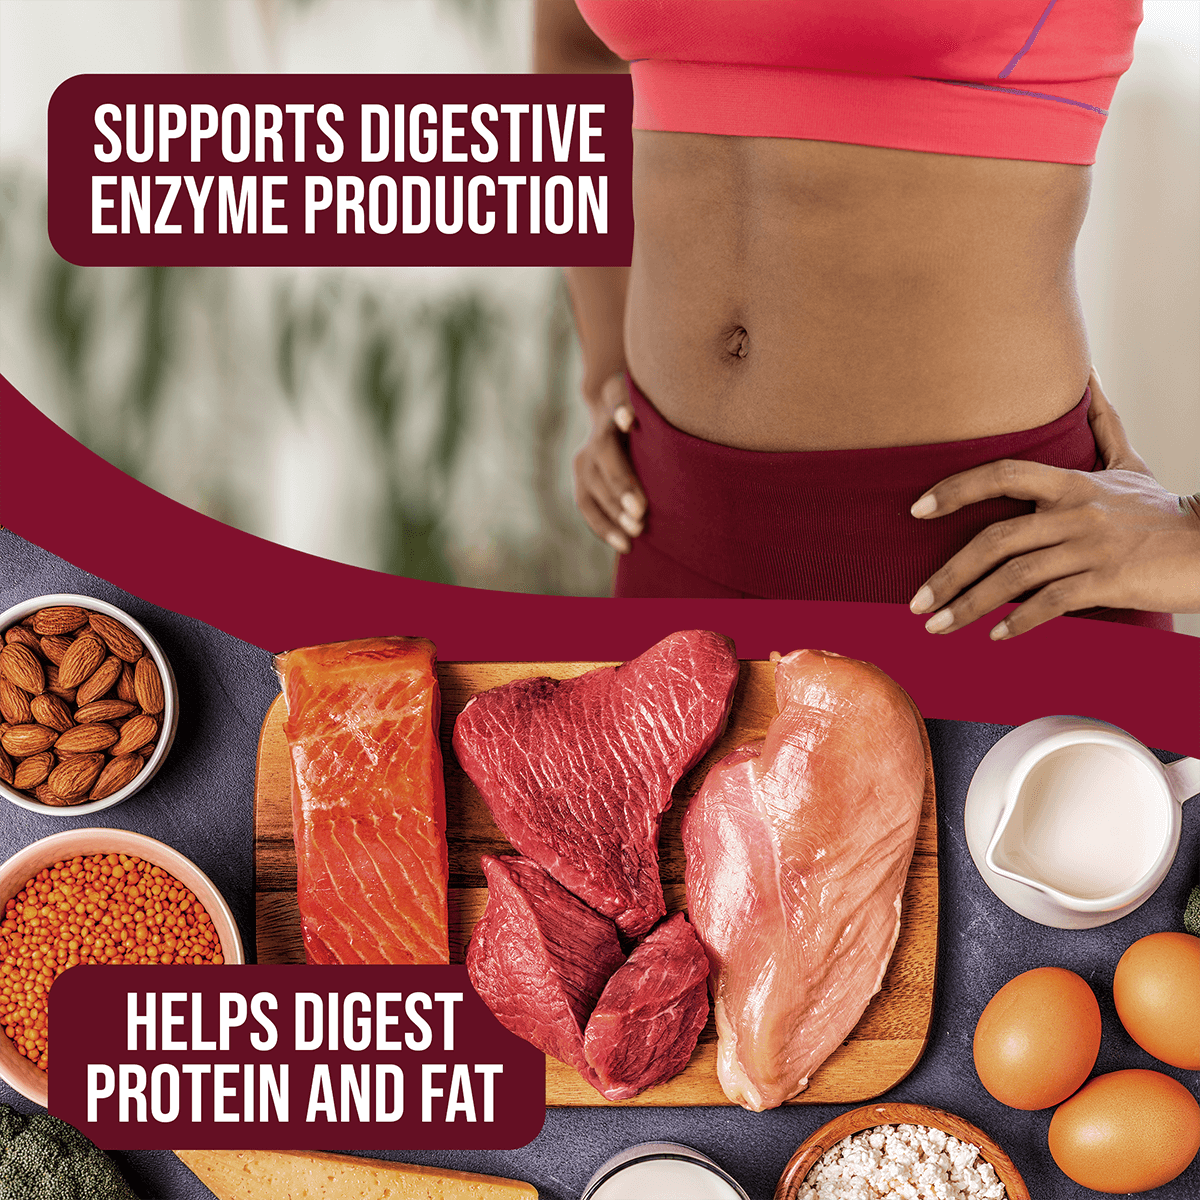 Supports digestive enzyme production